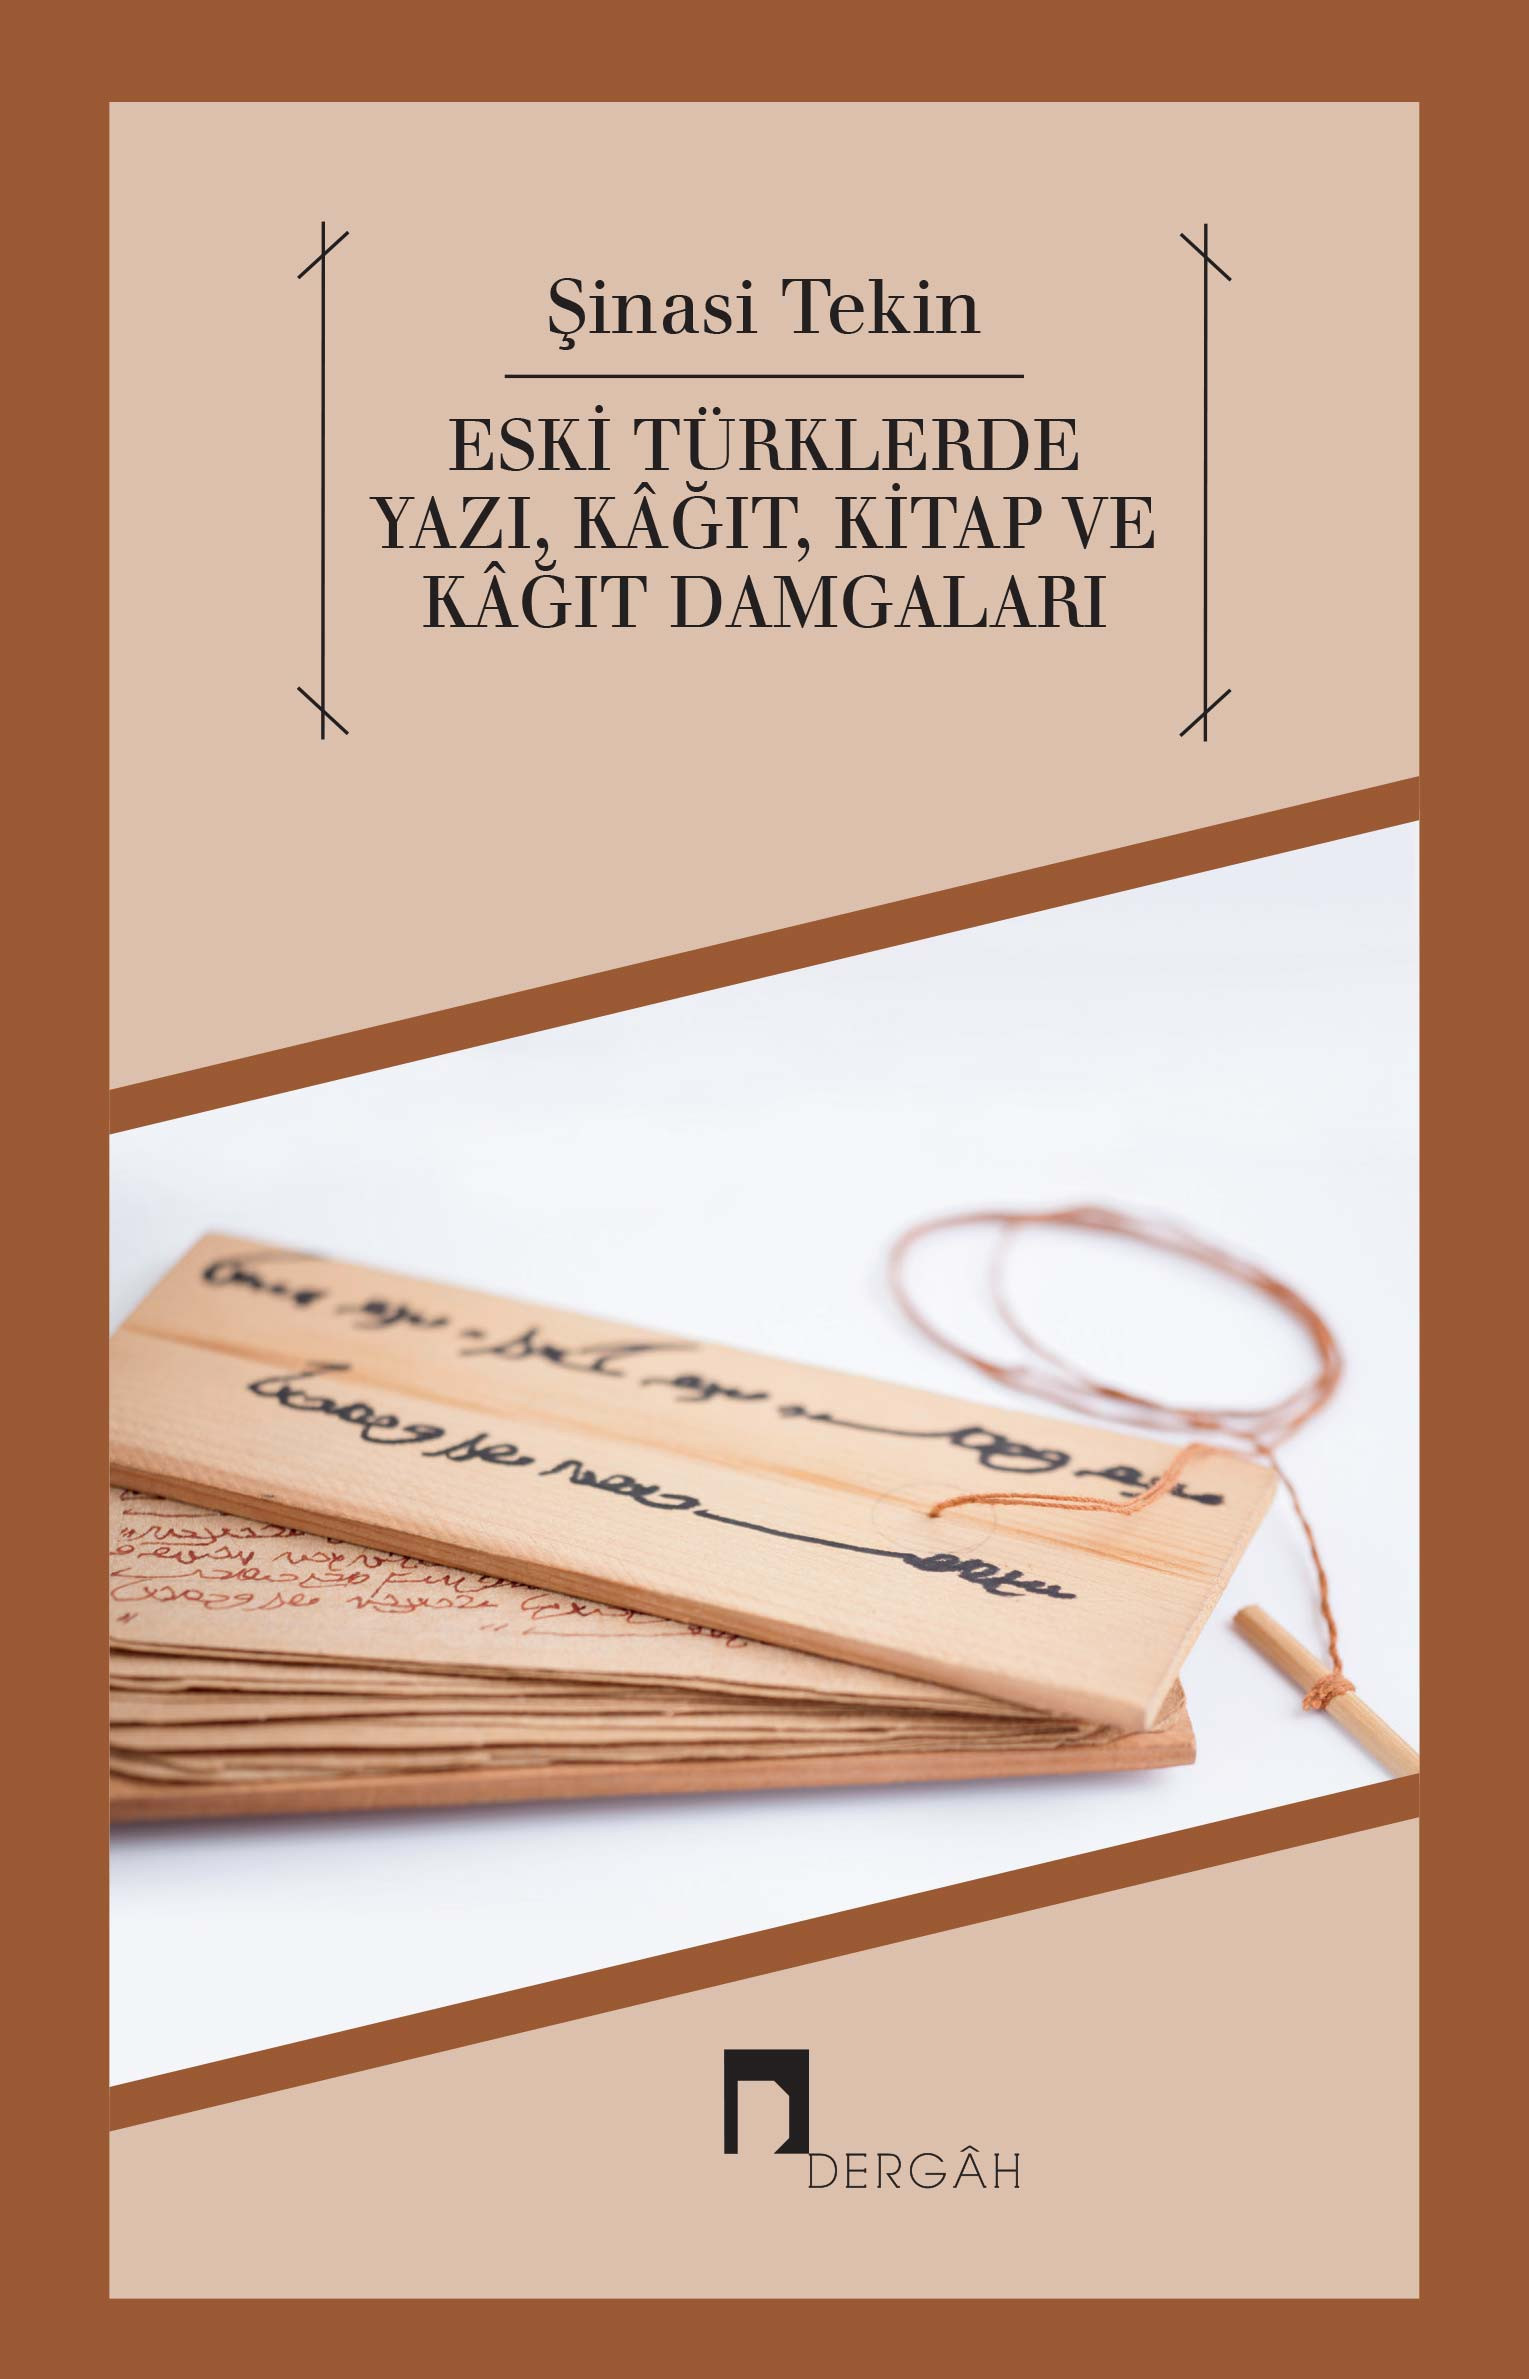 Writing, Paper and Papermarks in Old Turks